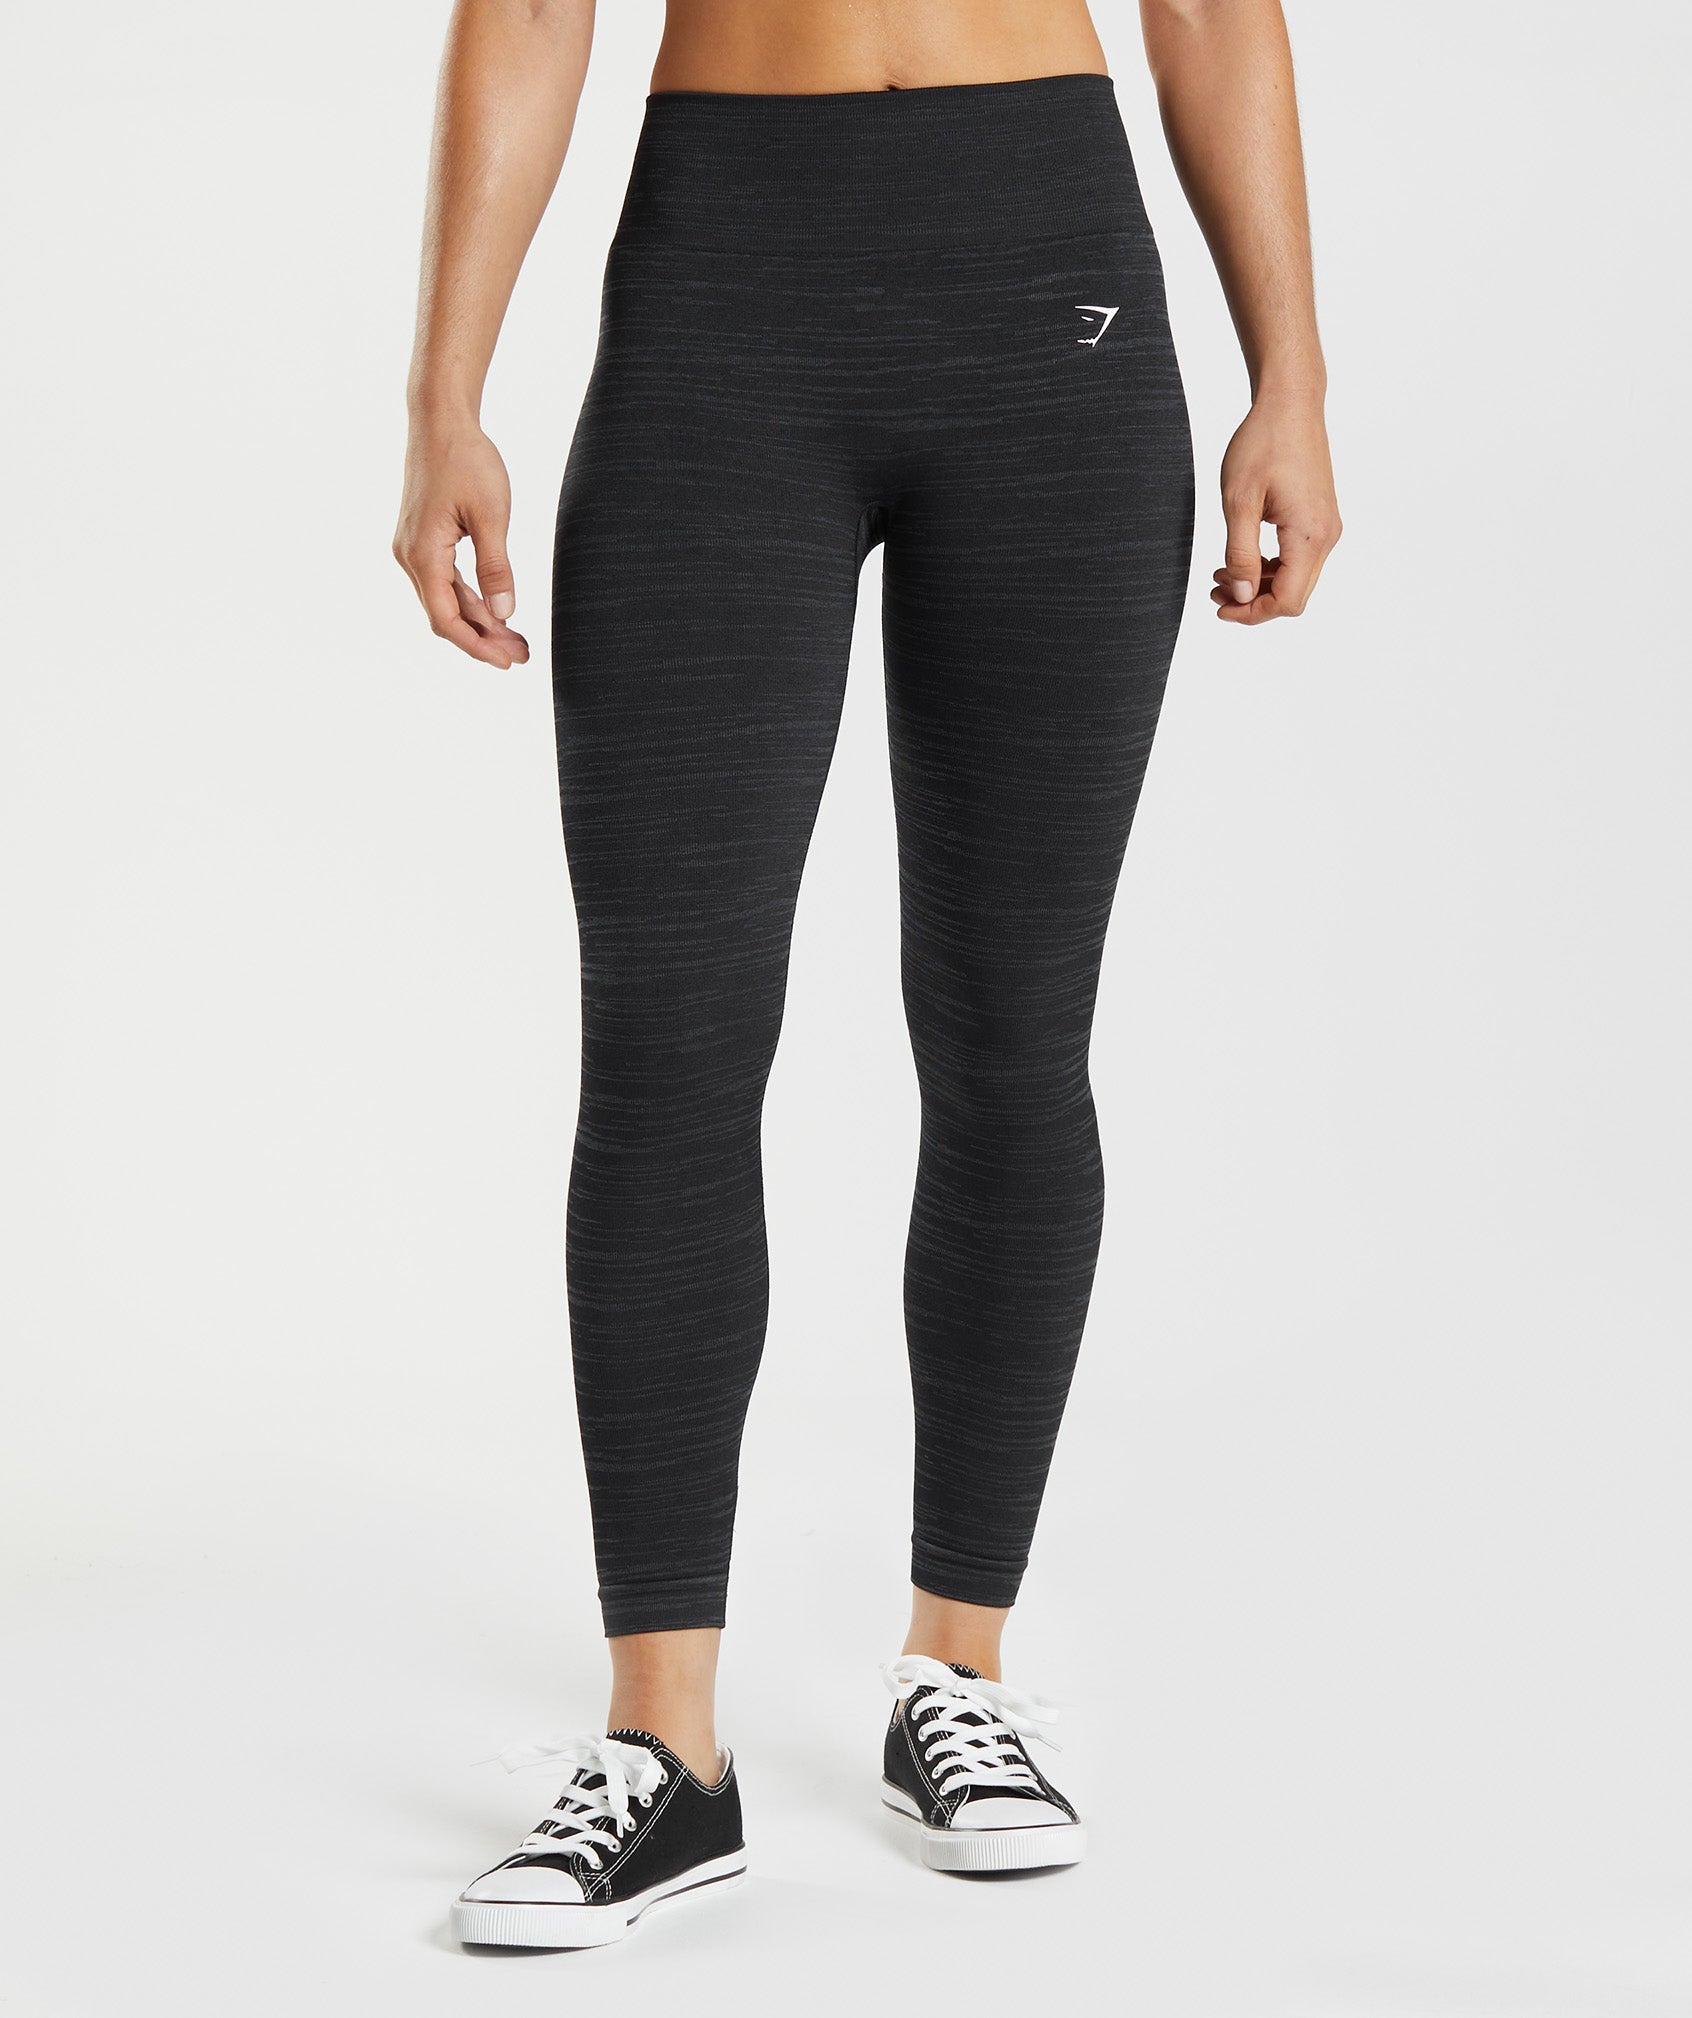 Gymshark Energy Seamless Legging Red - $18 (64% Off Retail) - From Maddy